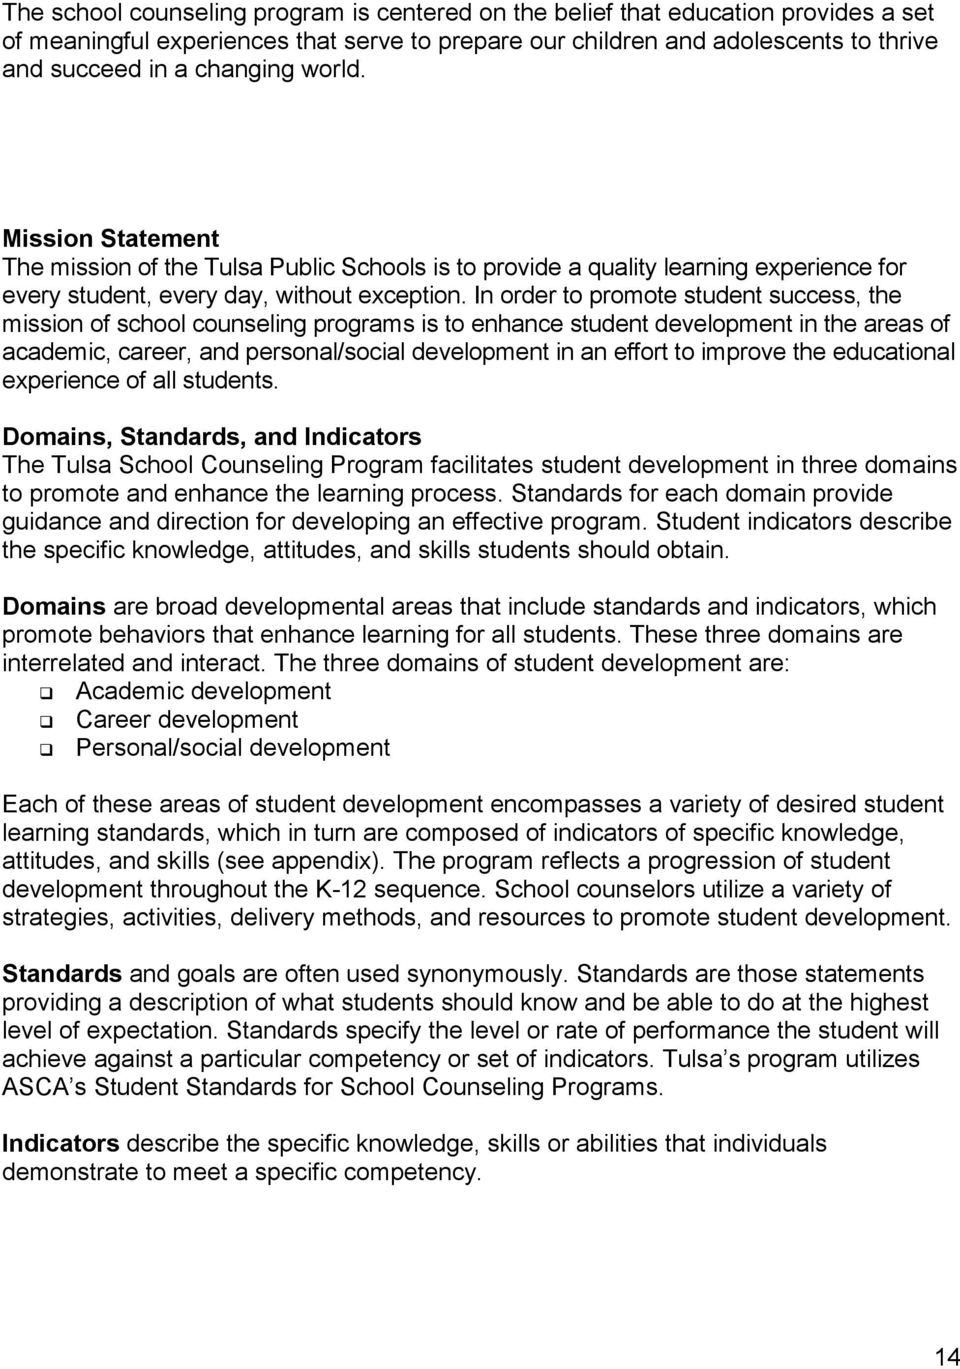 In order to promote student success, the mission of school counseling programs is to enhance student development in the areas of academic, career, and personal/social development in an effort to